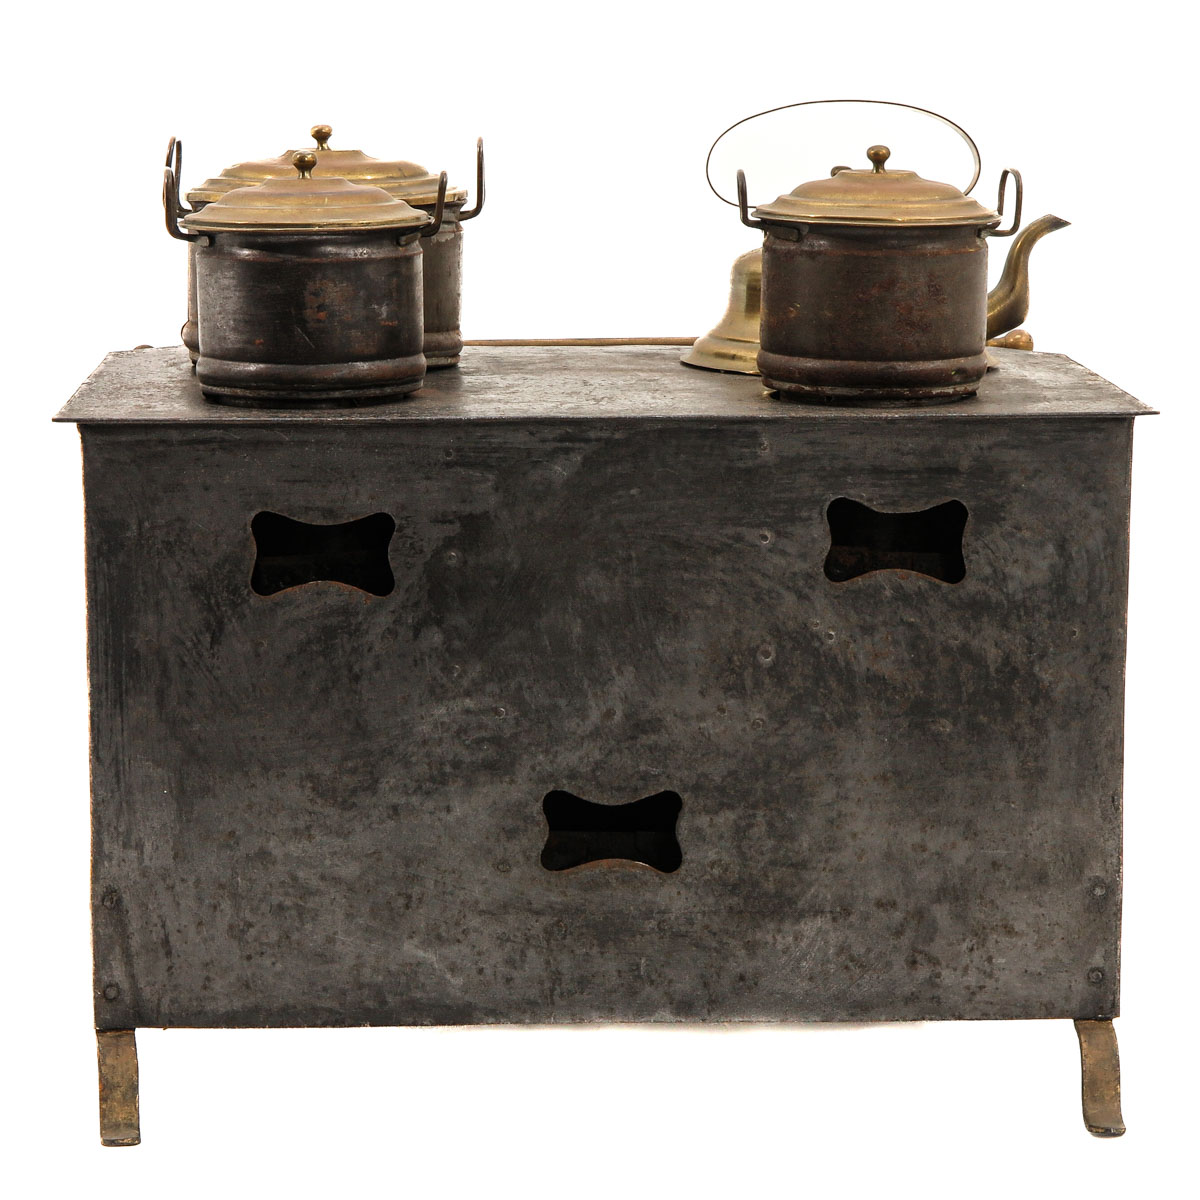 A Children's Stove - Image 3 of 9